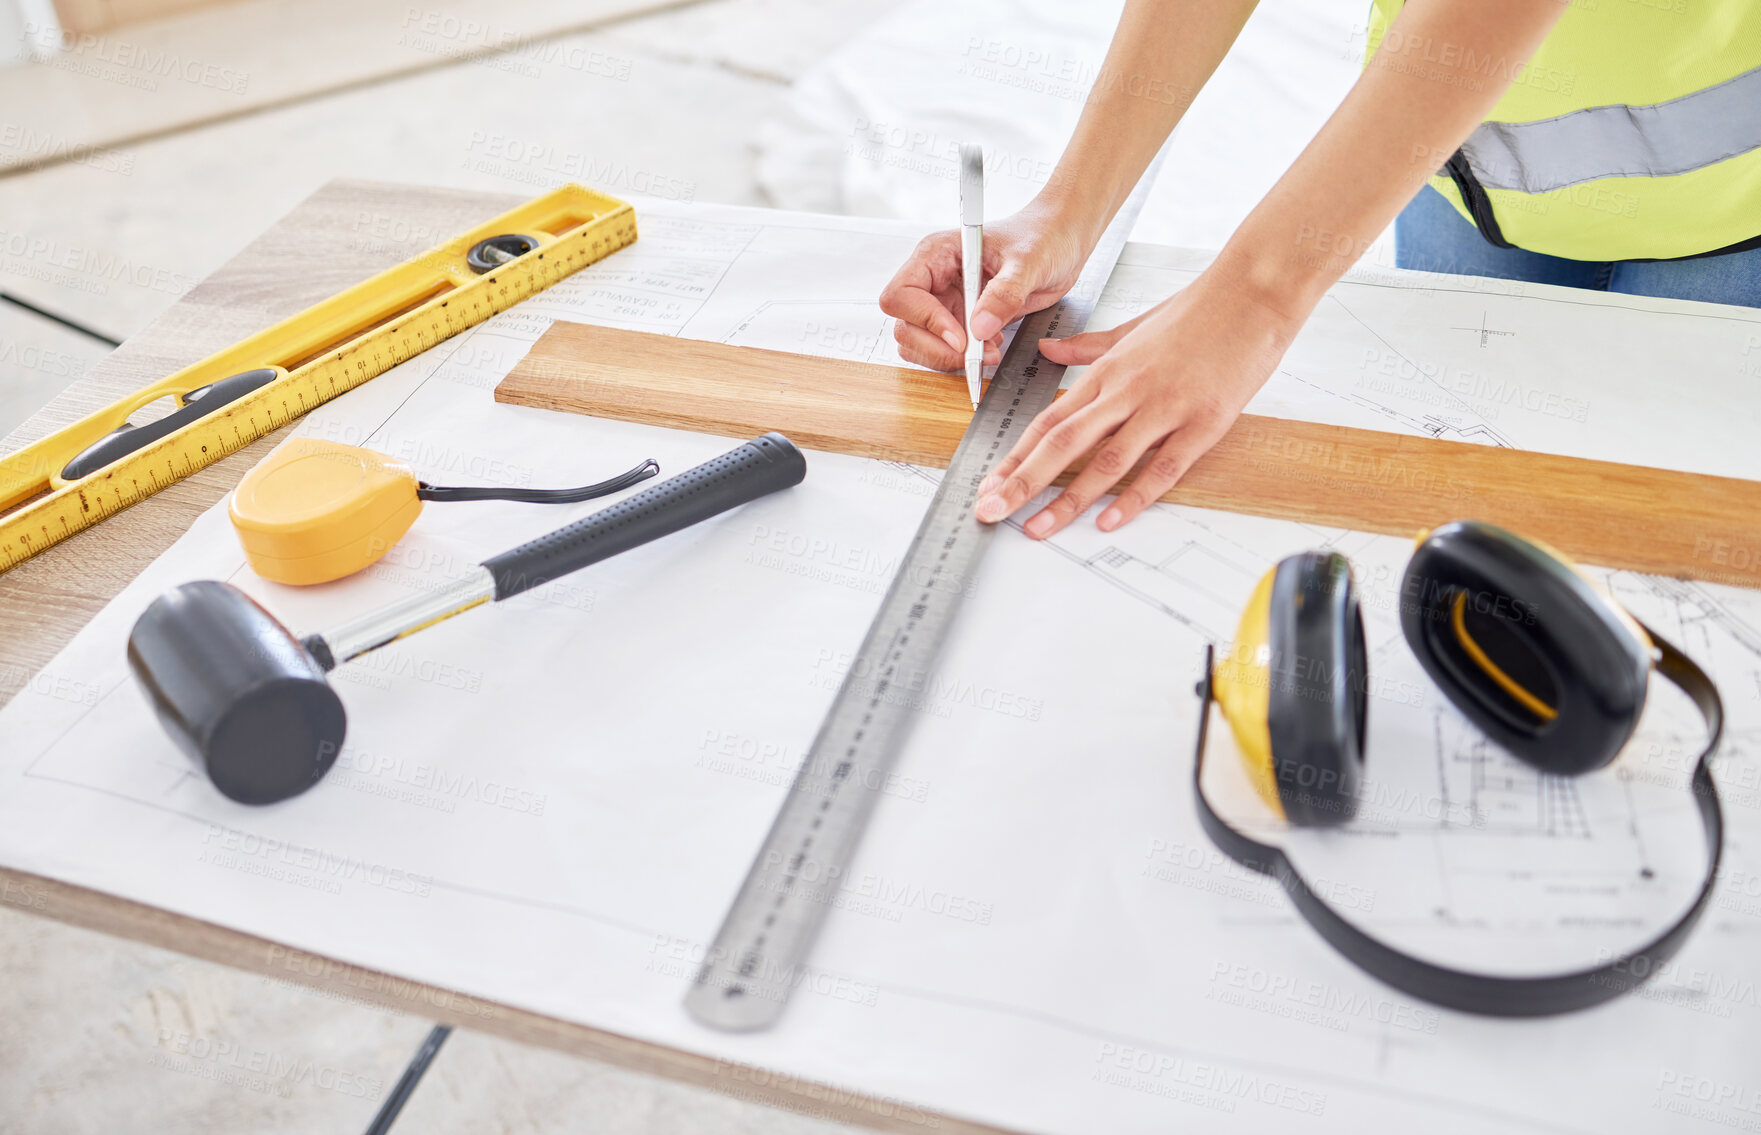 Buy stock photo Cropped shot of an unrecognisable contractor standing alone inside and using a ruler to draw up building plans